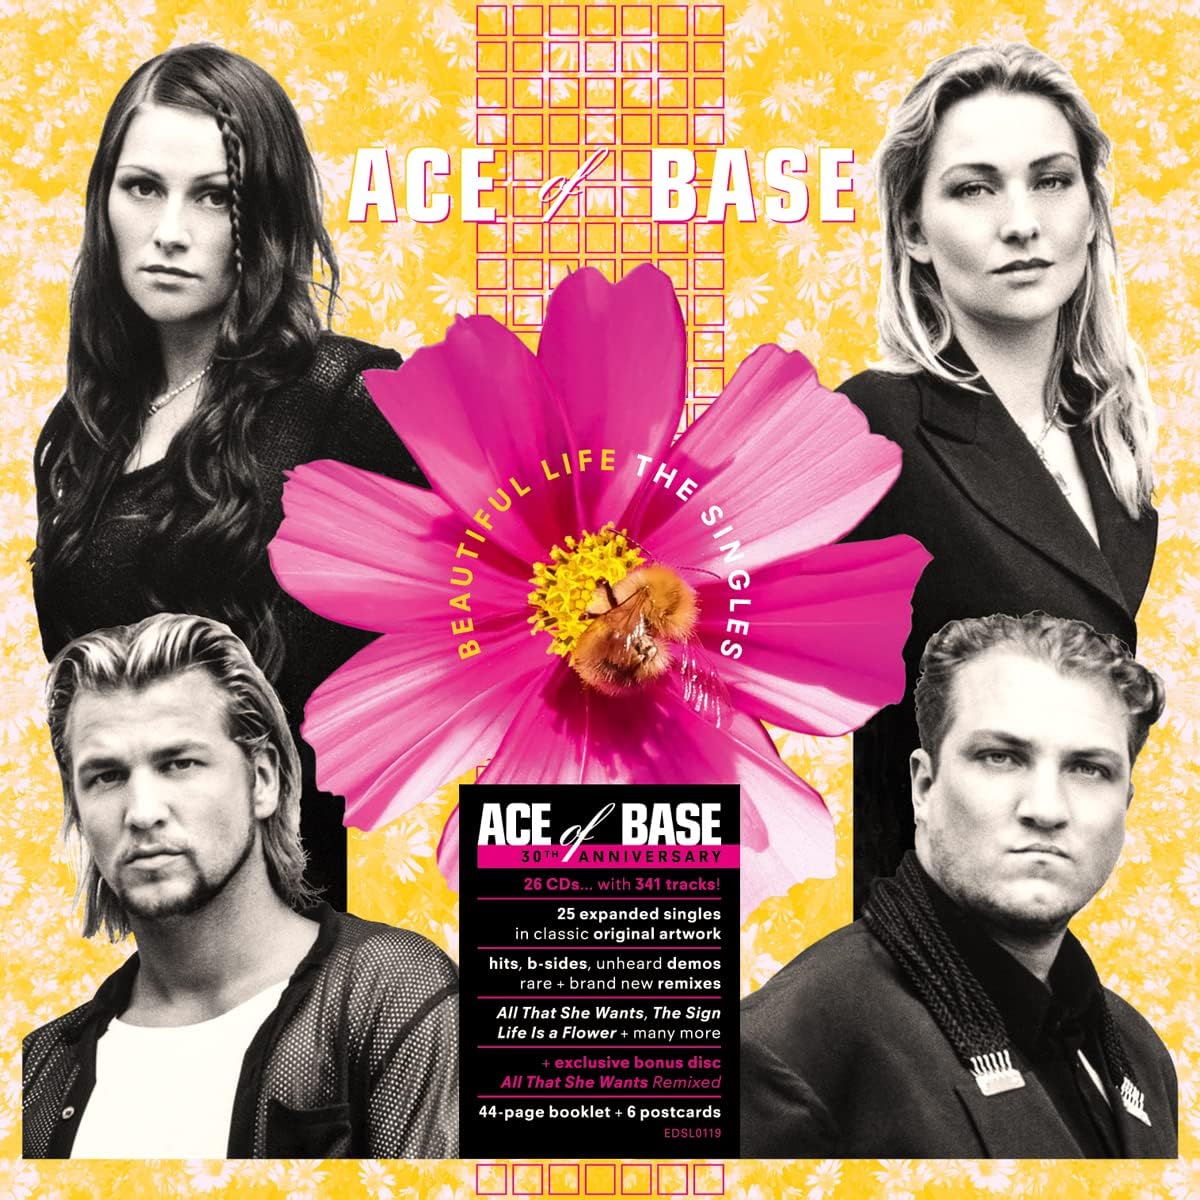 Ace of Base - Playlist: The Very Best of Ace of Base Album Reviews